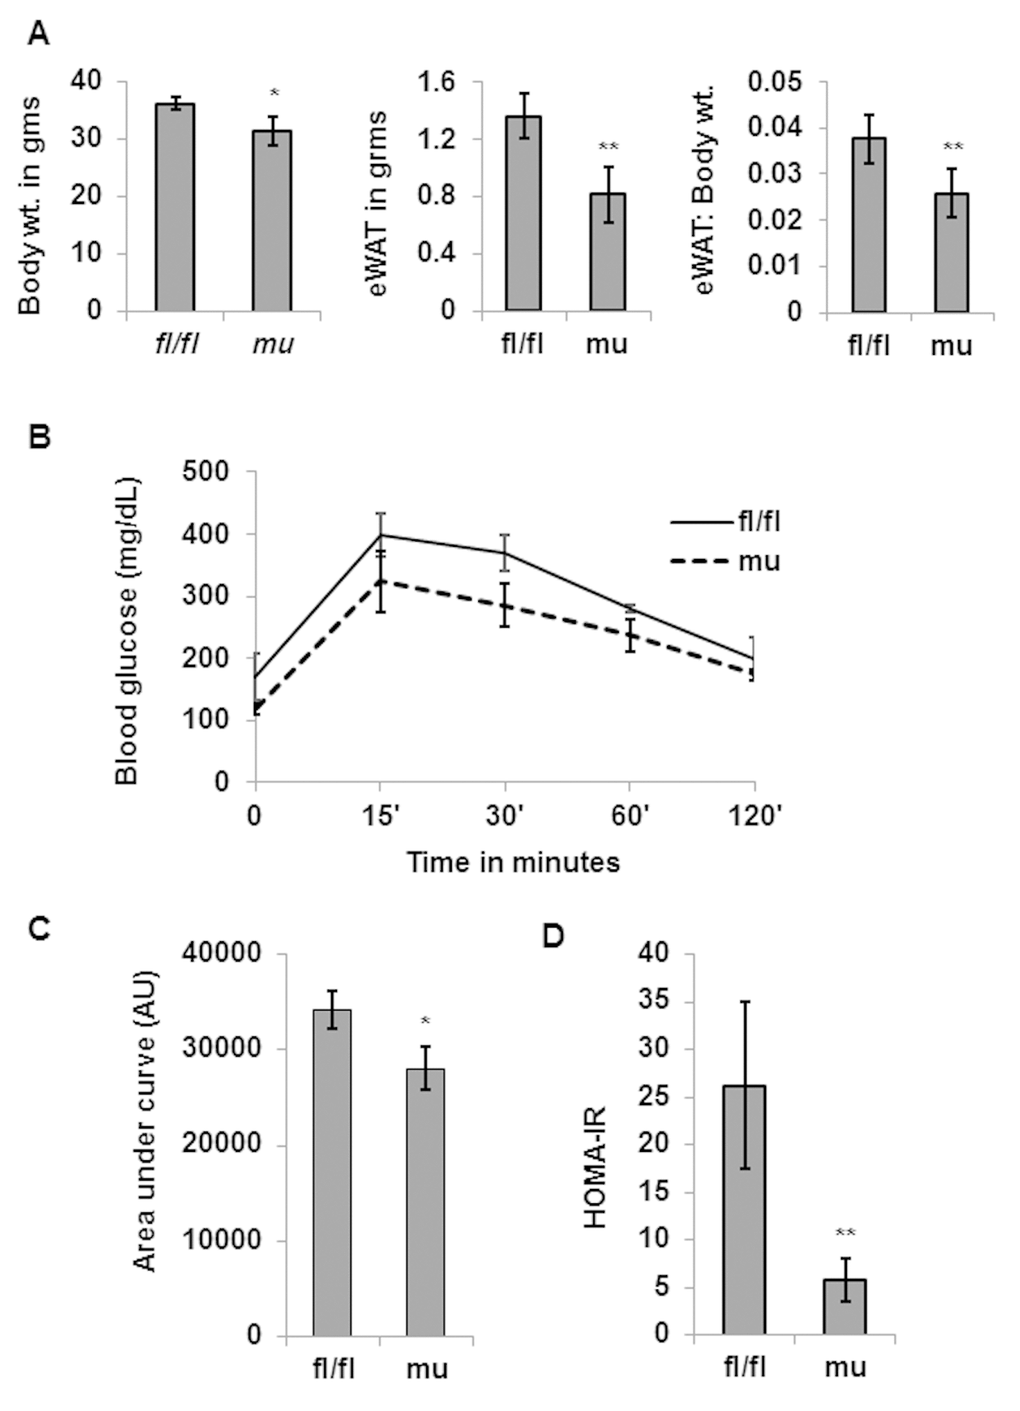 Pik3c3 mutant middle aged mice exhibit reduced adiposity and improved glucose tolerance. Total body weight, gWAT and gWAT: body weight ratio of middle aged (12 MO) fl/fl or mutant mice (n=5 for each group) were plotted (A). Blood glucose levels in GTT were plotted in (B) and area under the curve was plotted in (C). The significance levels were analyzed by unpaired Student’s t-test using means and SDs and designated as *p0.05).